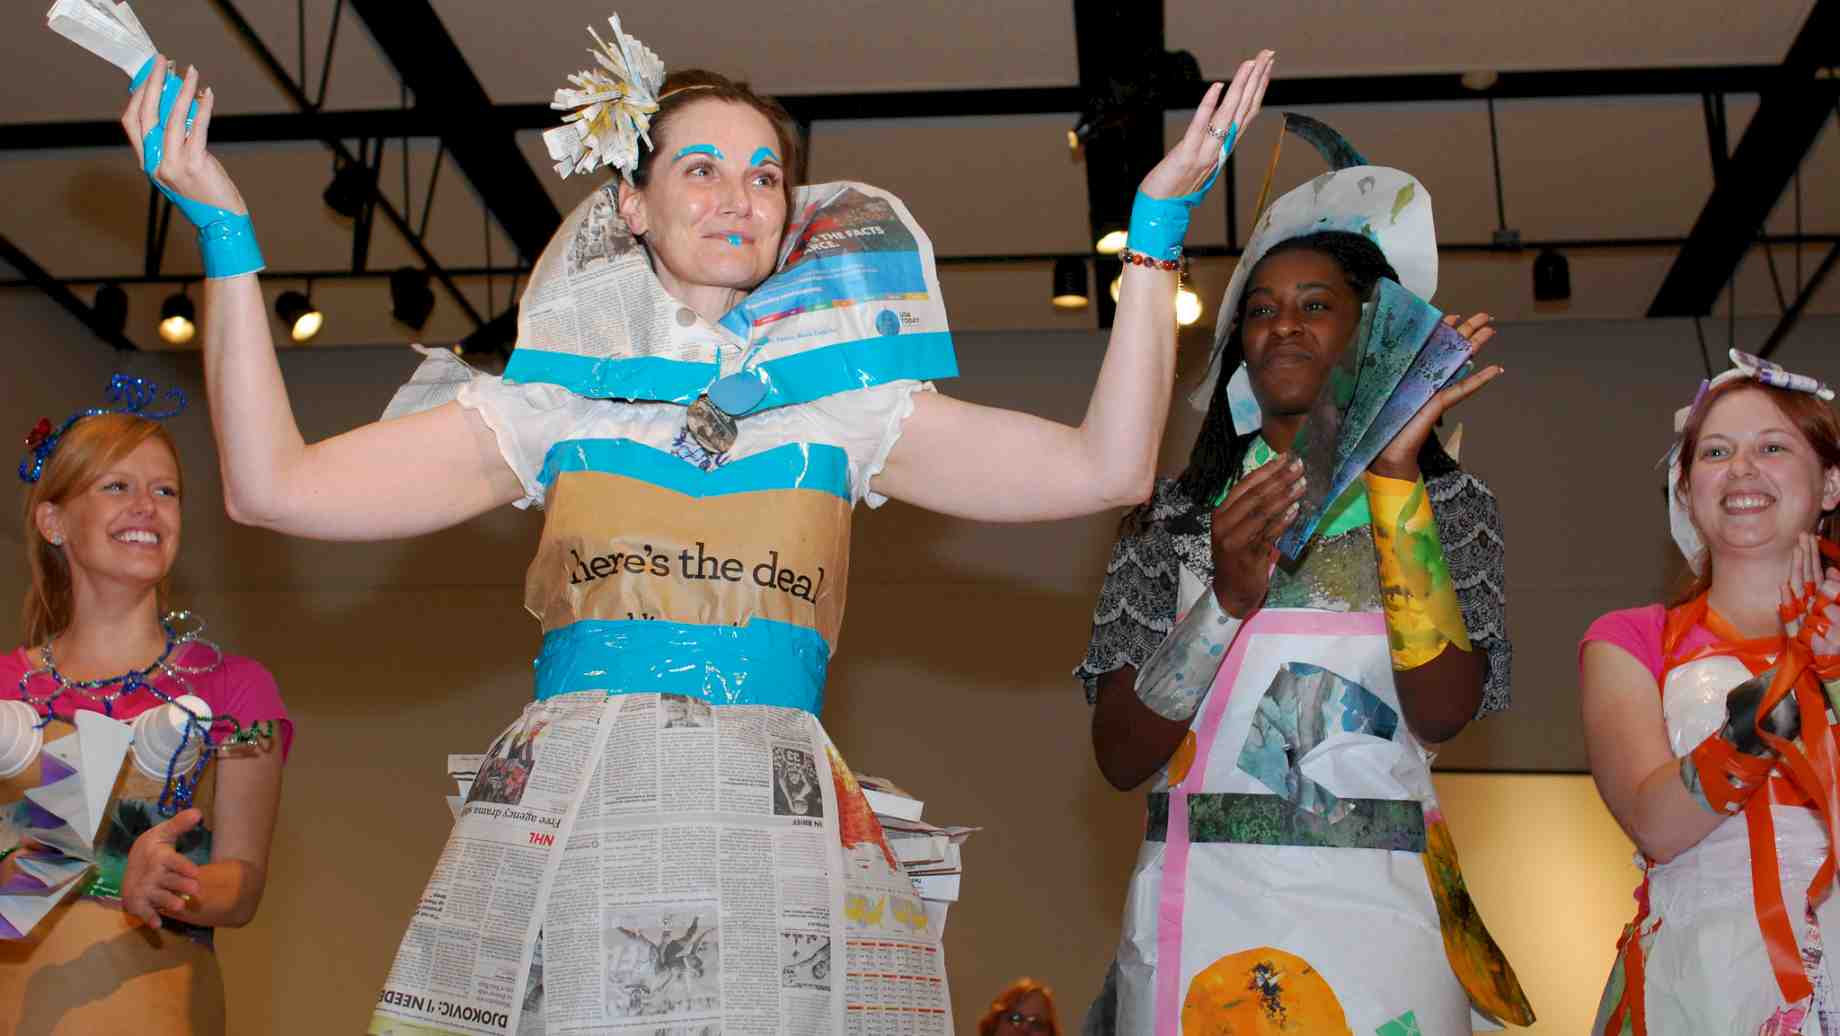 Winner of our Summer Runway Contest that required creating wearable art as a group using limited found materials.